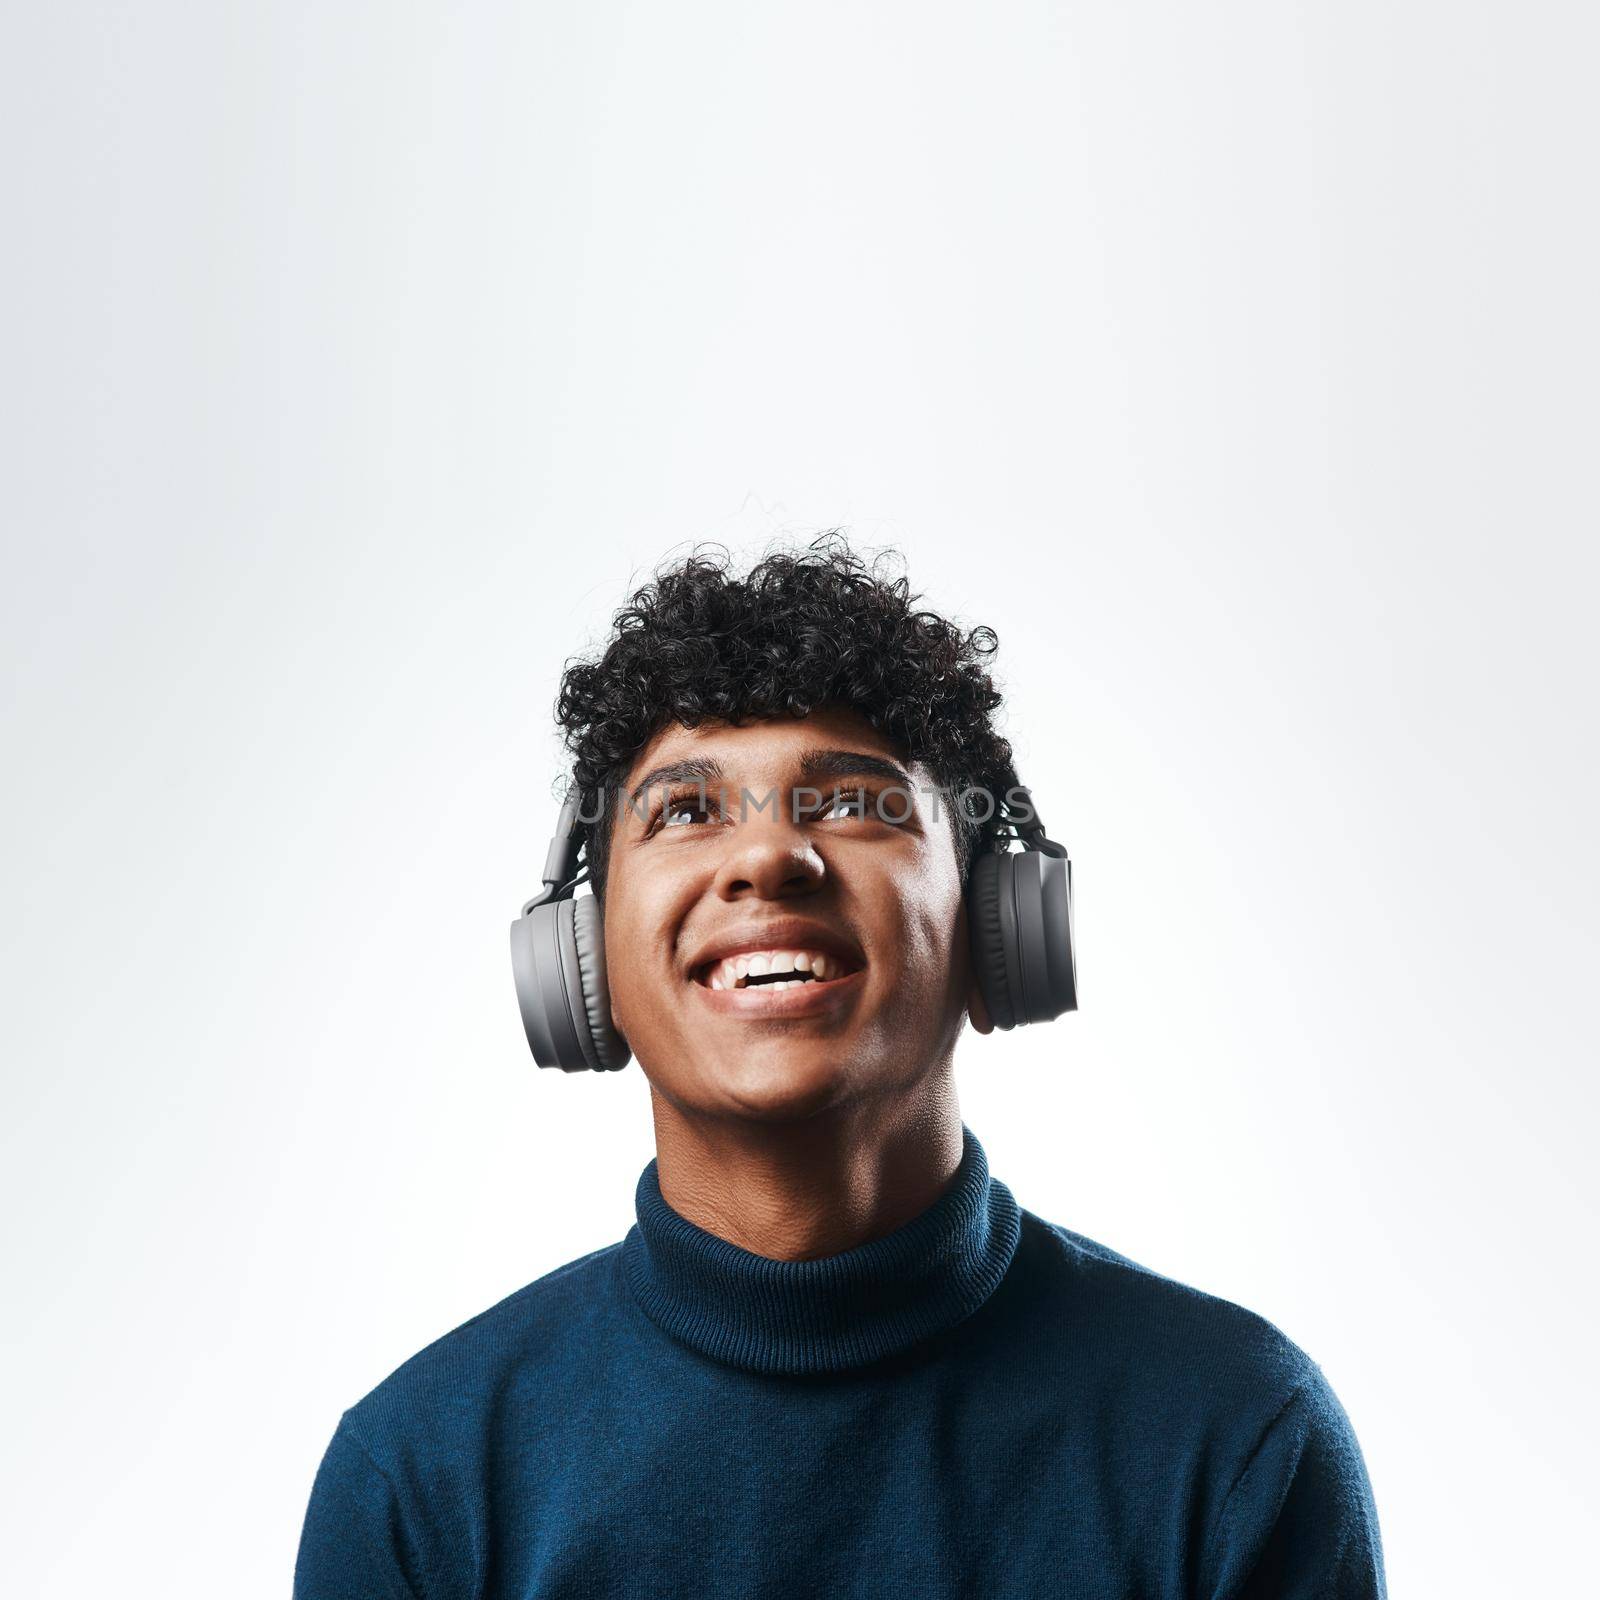 Studio shot of a young man using headphones against a grey background.